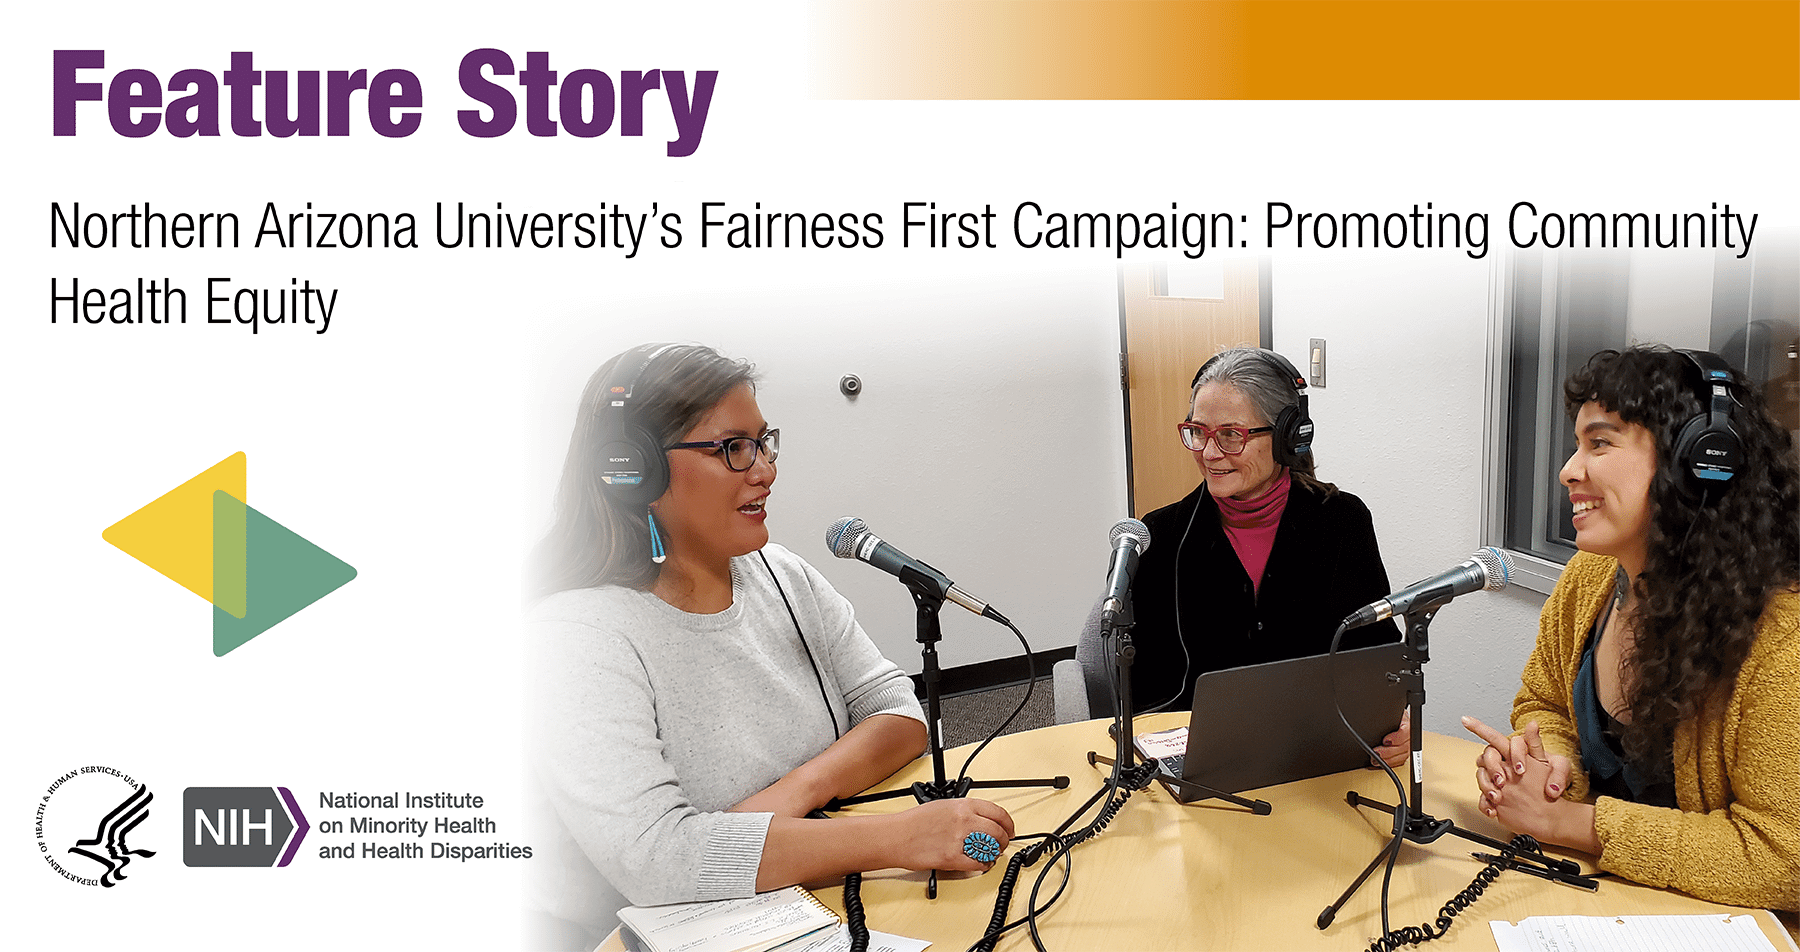 Feature story: Northern Arizona University’s Fairness First Campaign: Promoting Community Health Equity